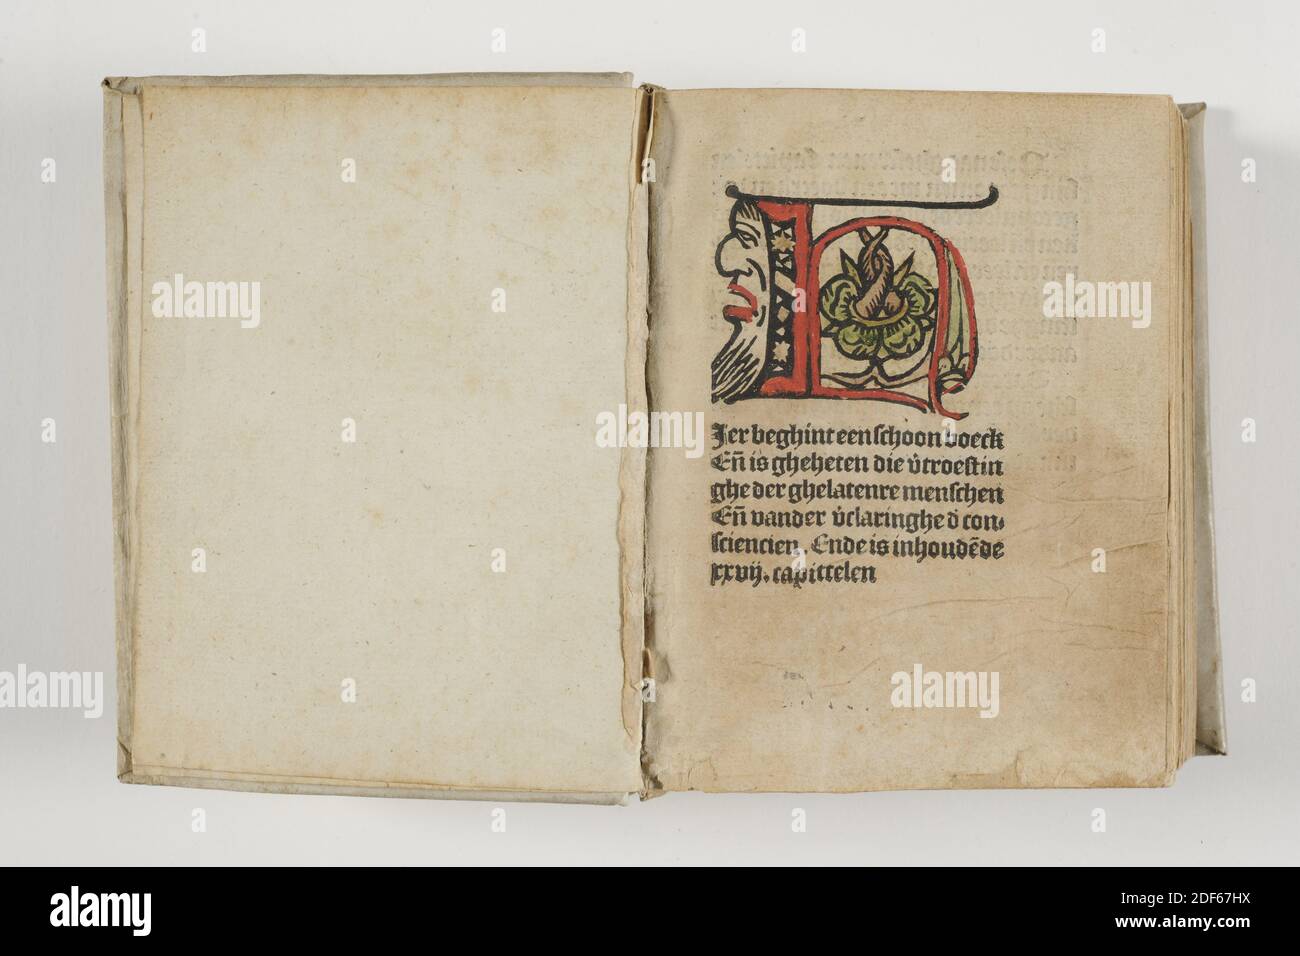 book, 1502, ink, cardboard, paper, General: 13.2 x 11.2 x 4.5cm (132 x 112 x 45mm), Prayer book titled Consolation of the left men and of the Verclaringhe der Consciencie, printed by Hugo Janszoon van Woerden. The bound book contains a plain cover. At the top of the spine is the title of the book Vertroostinghe der gelatenre menschen en der Verclaringhe der Consciencie and written with ink in Leyden 1502. The interior consists of unnumbered pages with only text. On the title page there is an initial of the letter H, richly decorated, with in black letters the text Here starts a beautiful boeck Stock Photo